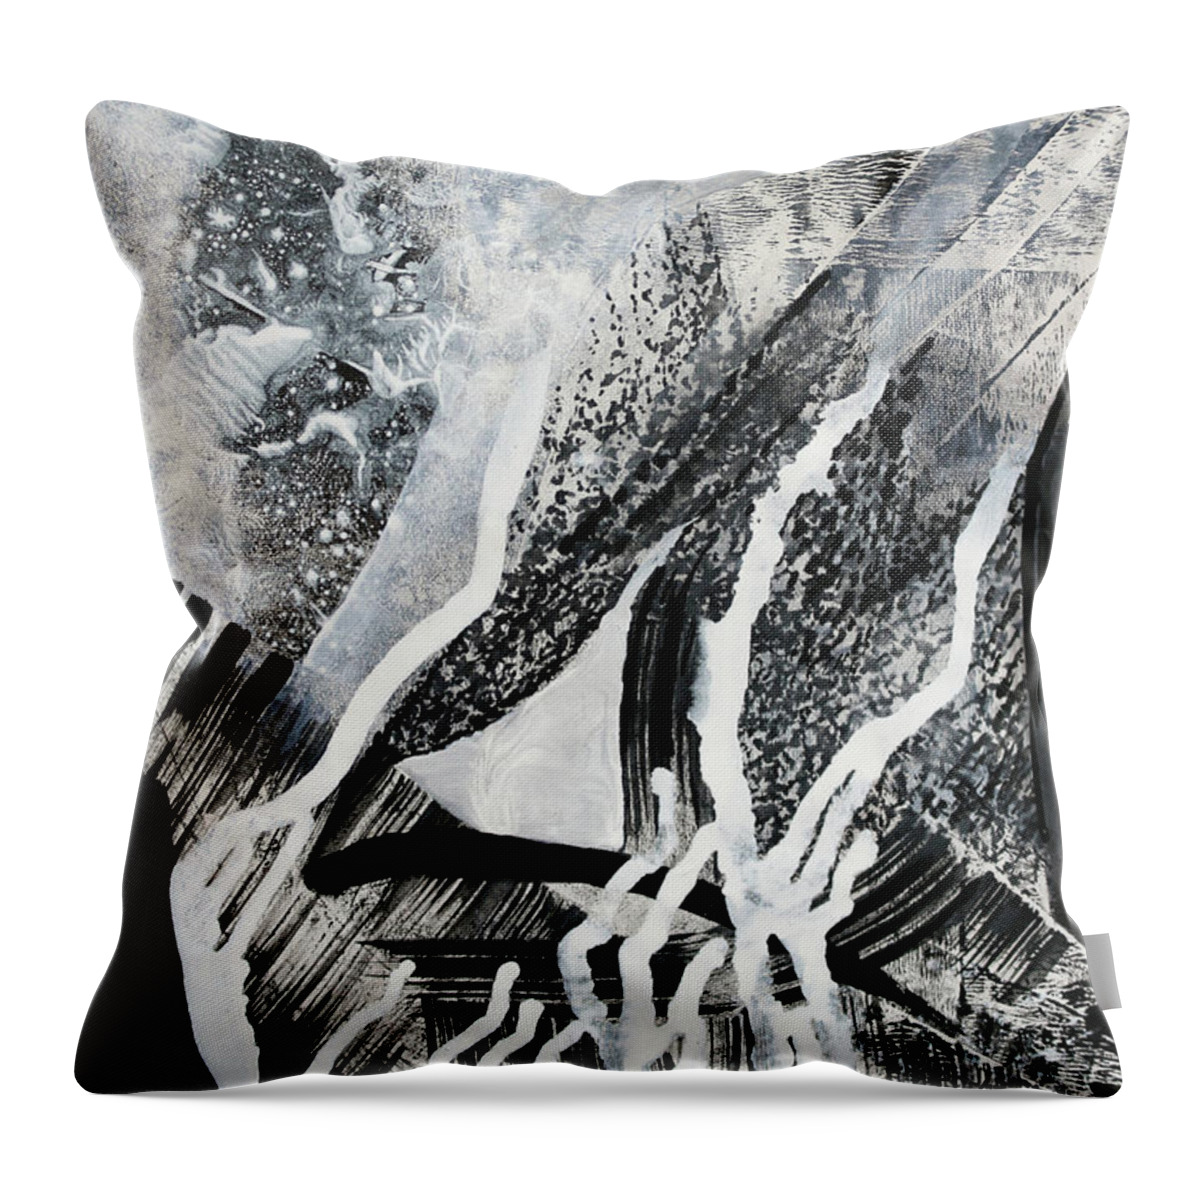 Black And White Throw Pillow featuring the painting Hidden Hot Springs by Polly Castor